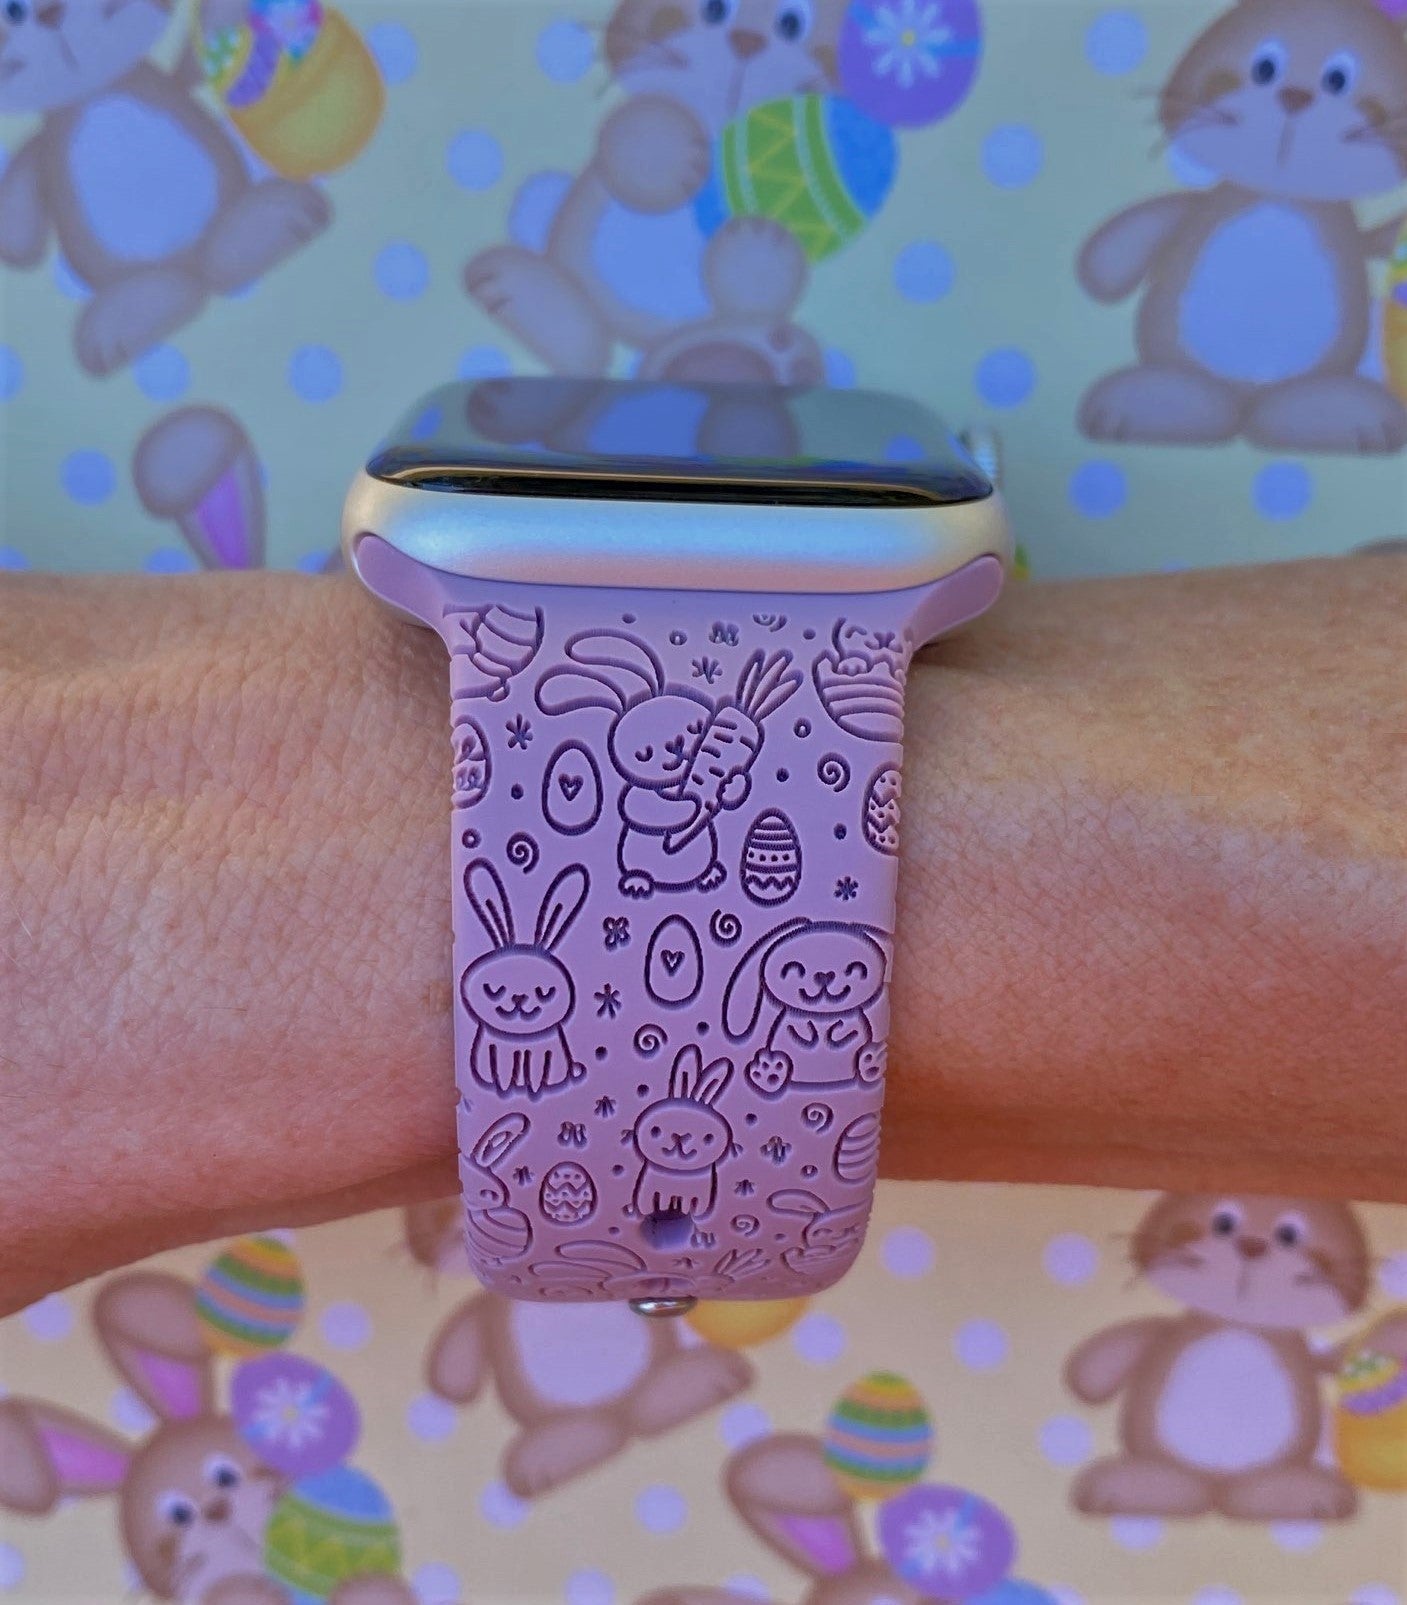 Easter Bunny Apple Watch Band